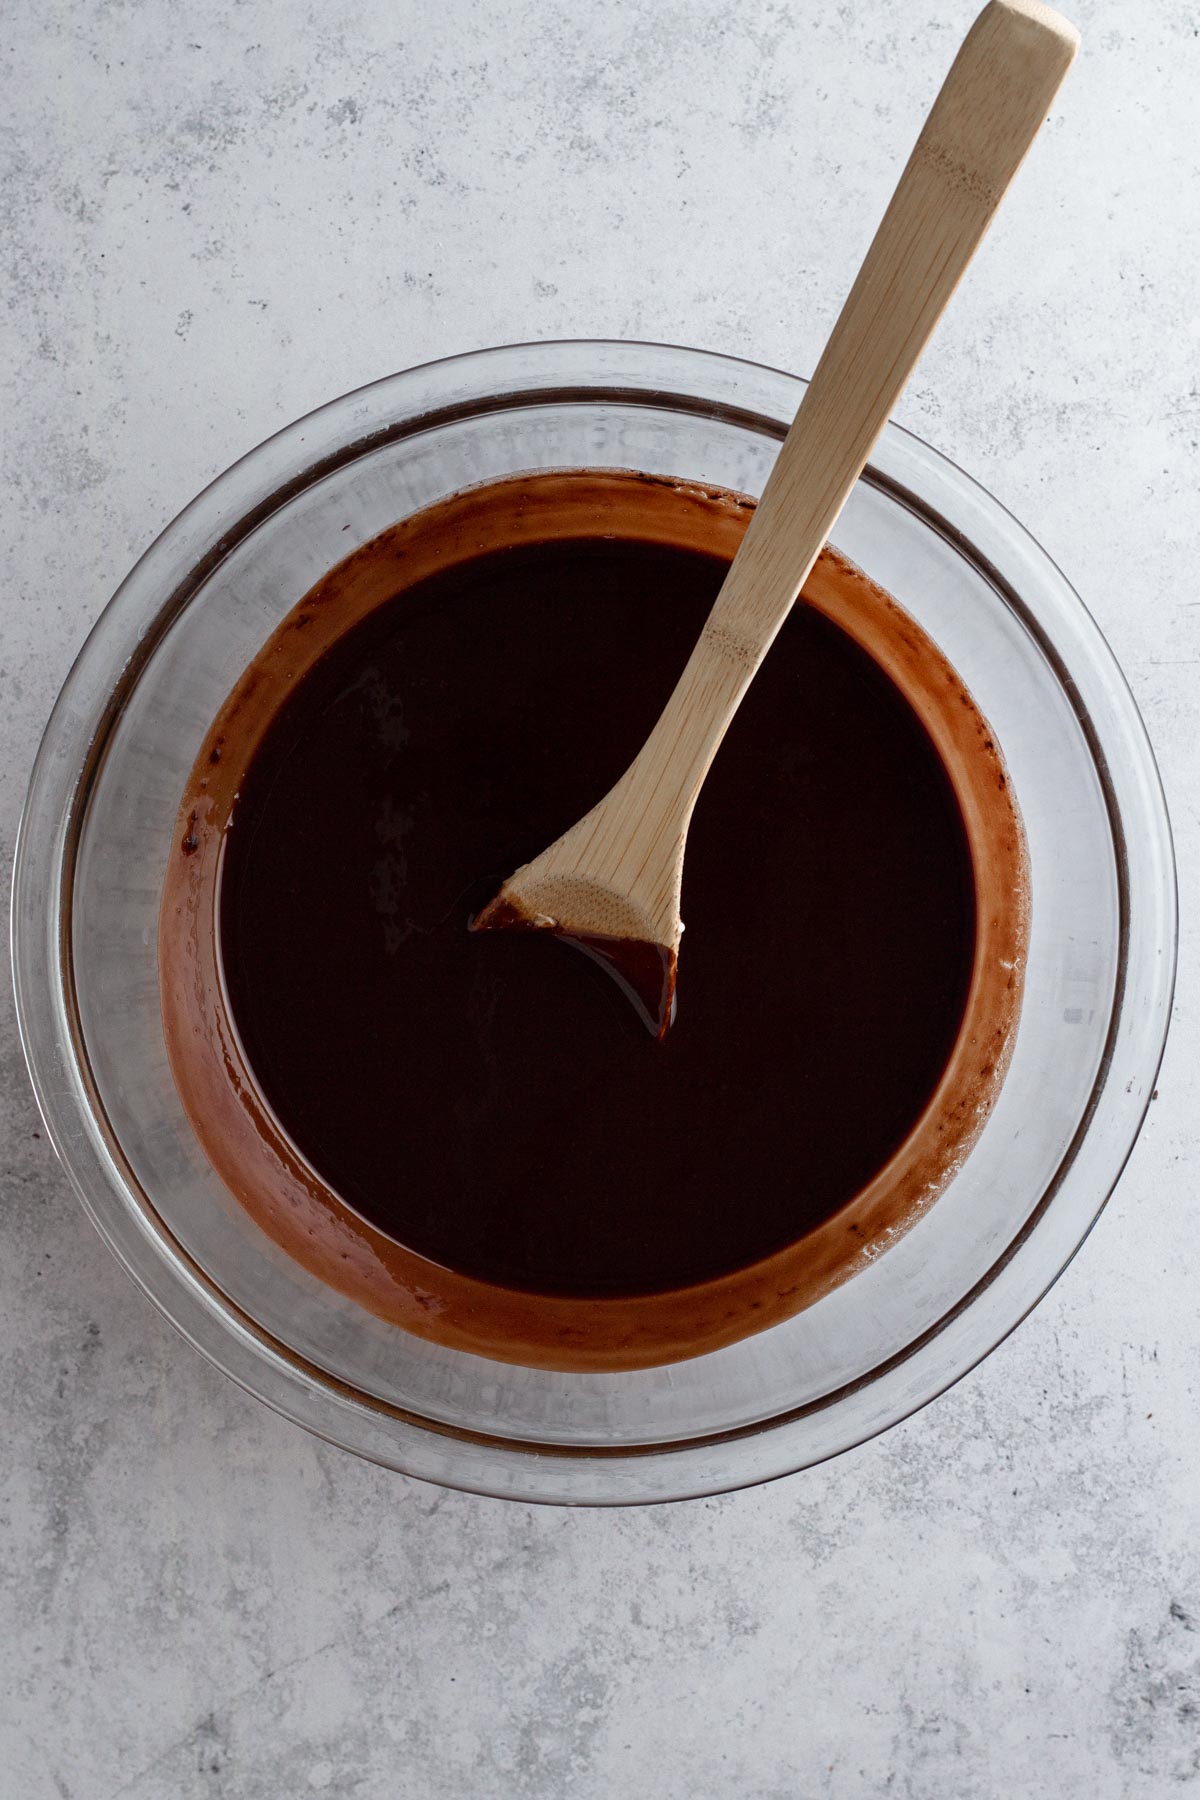 Melted chocolate and butter blended together in a glass bowl with a wooden spoon.